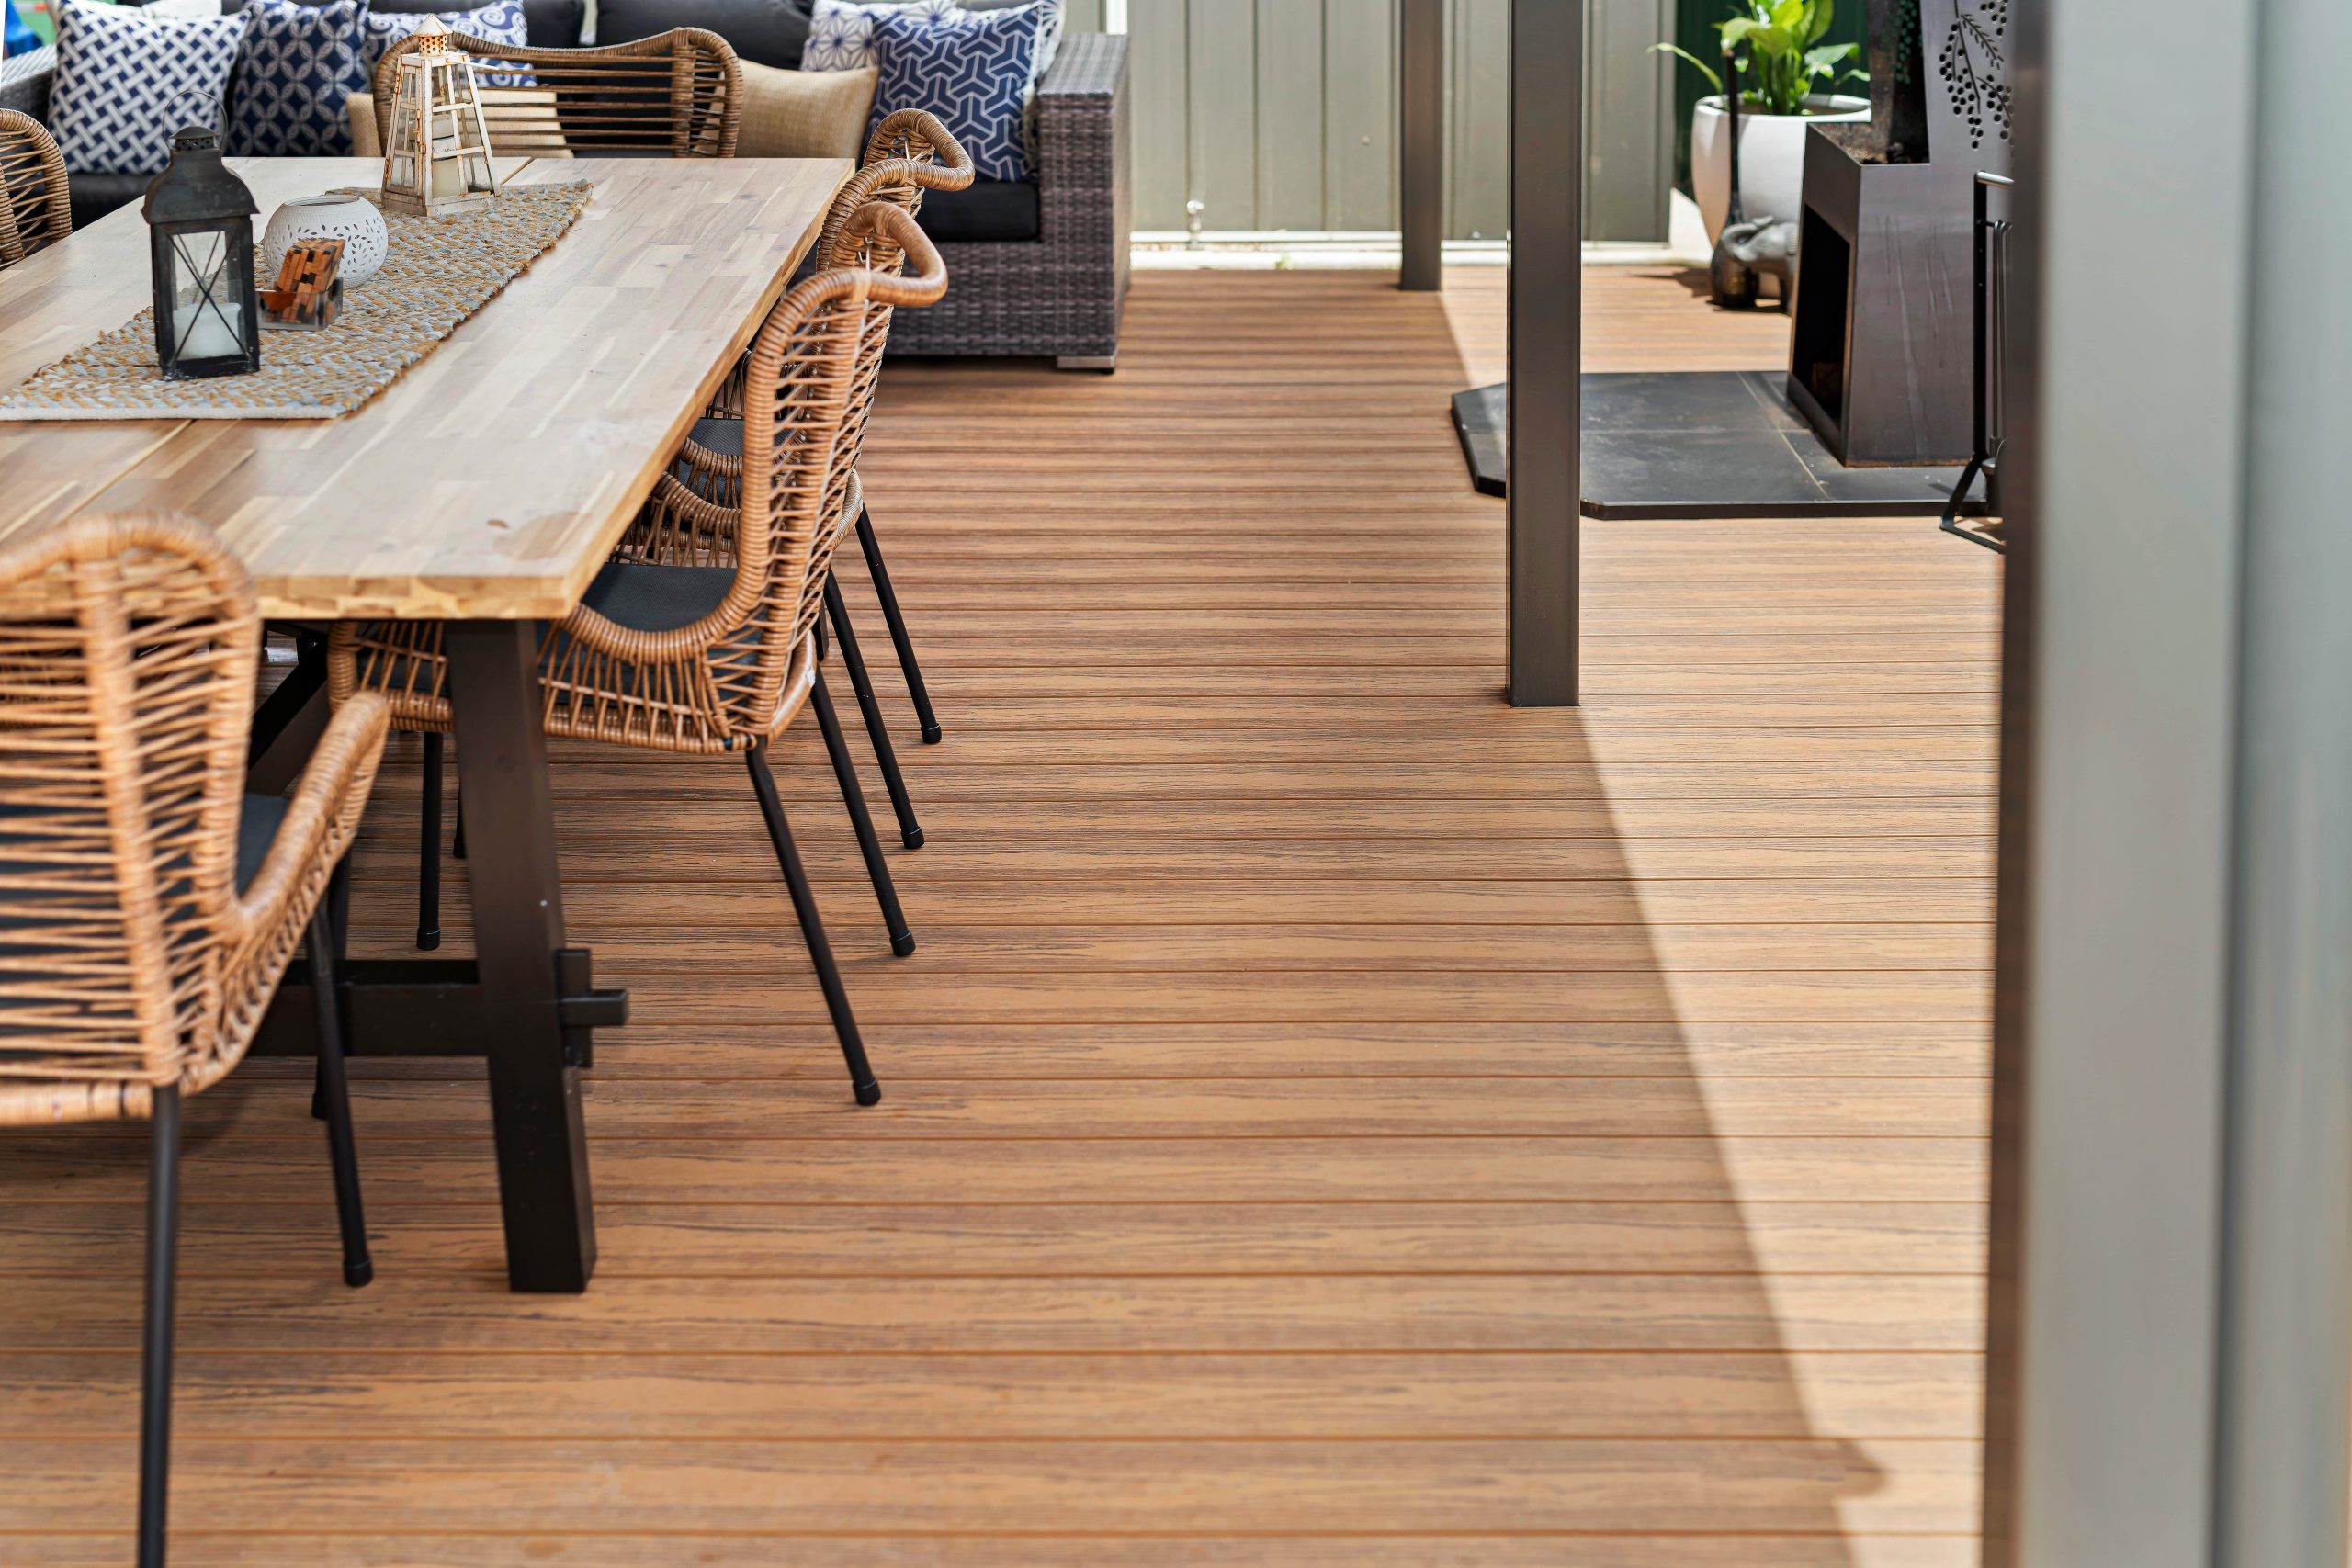 Light brown Brite composite decking boards with a patio table